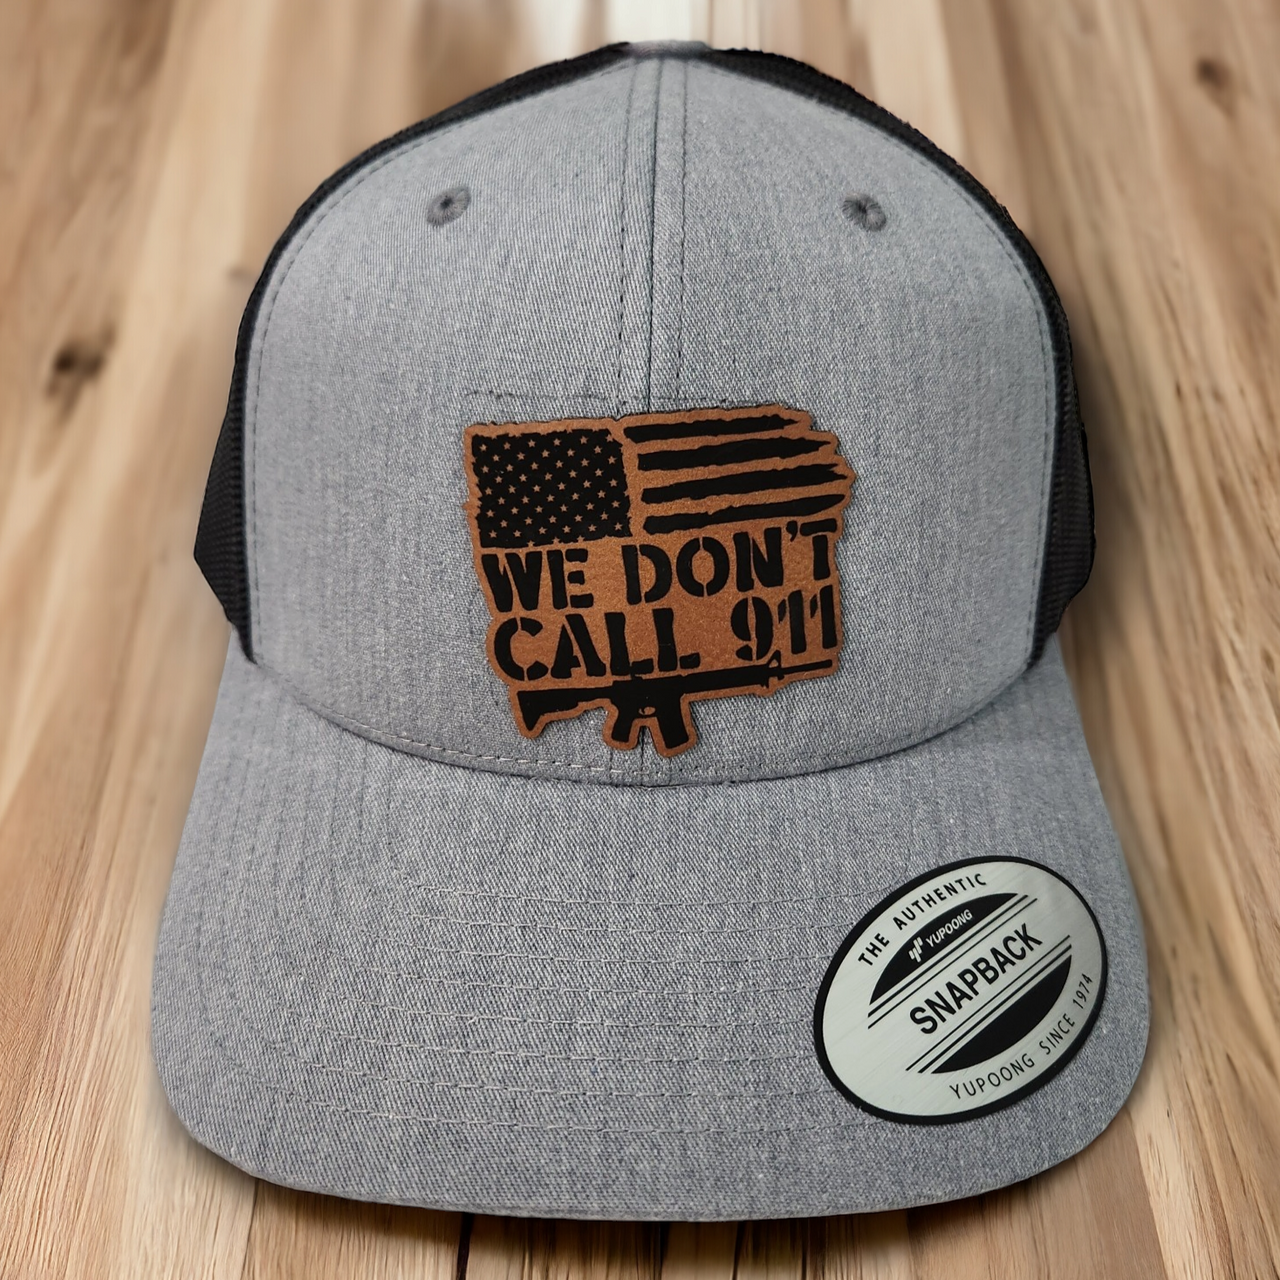 We Don't Call 911 AR & American Flag Leather Patch Trucker Hat